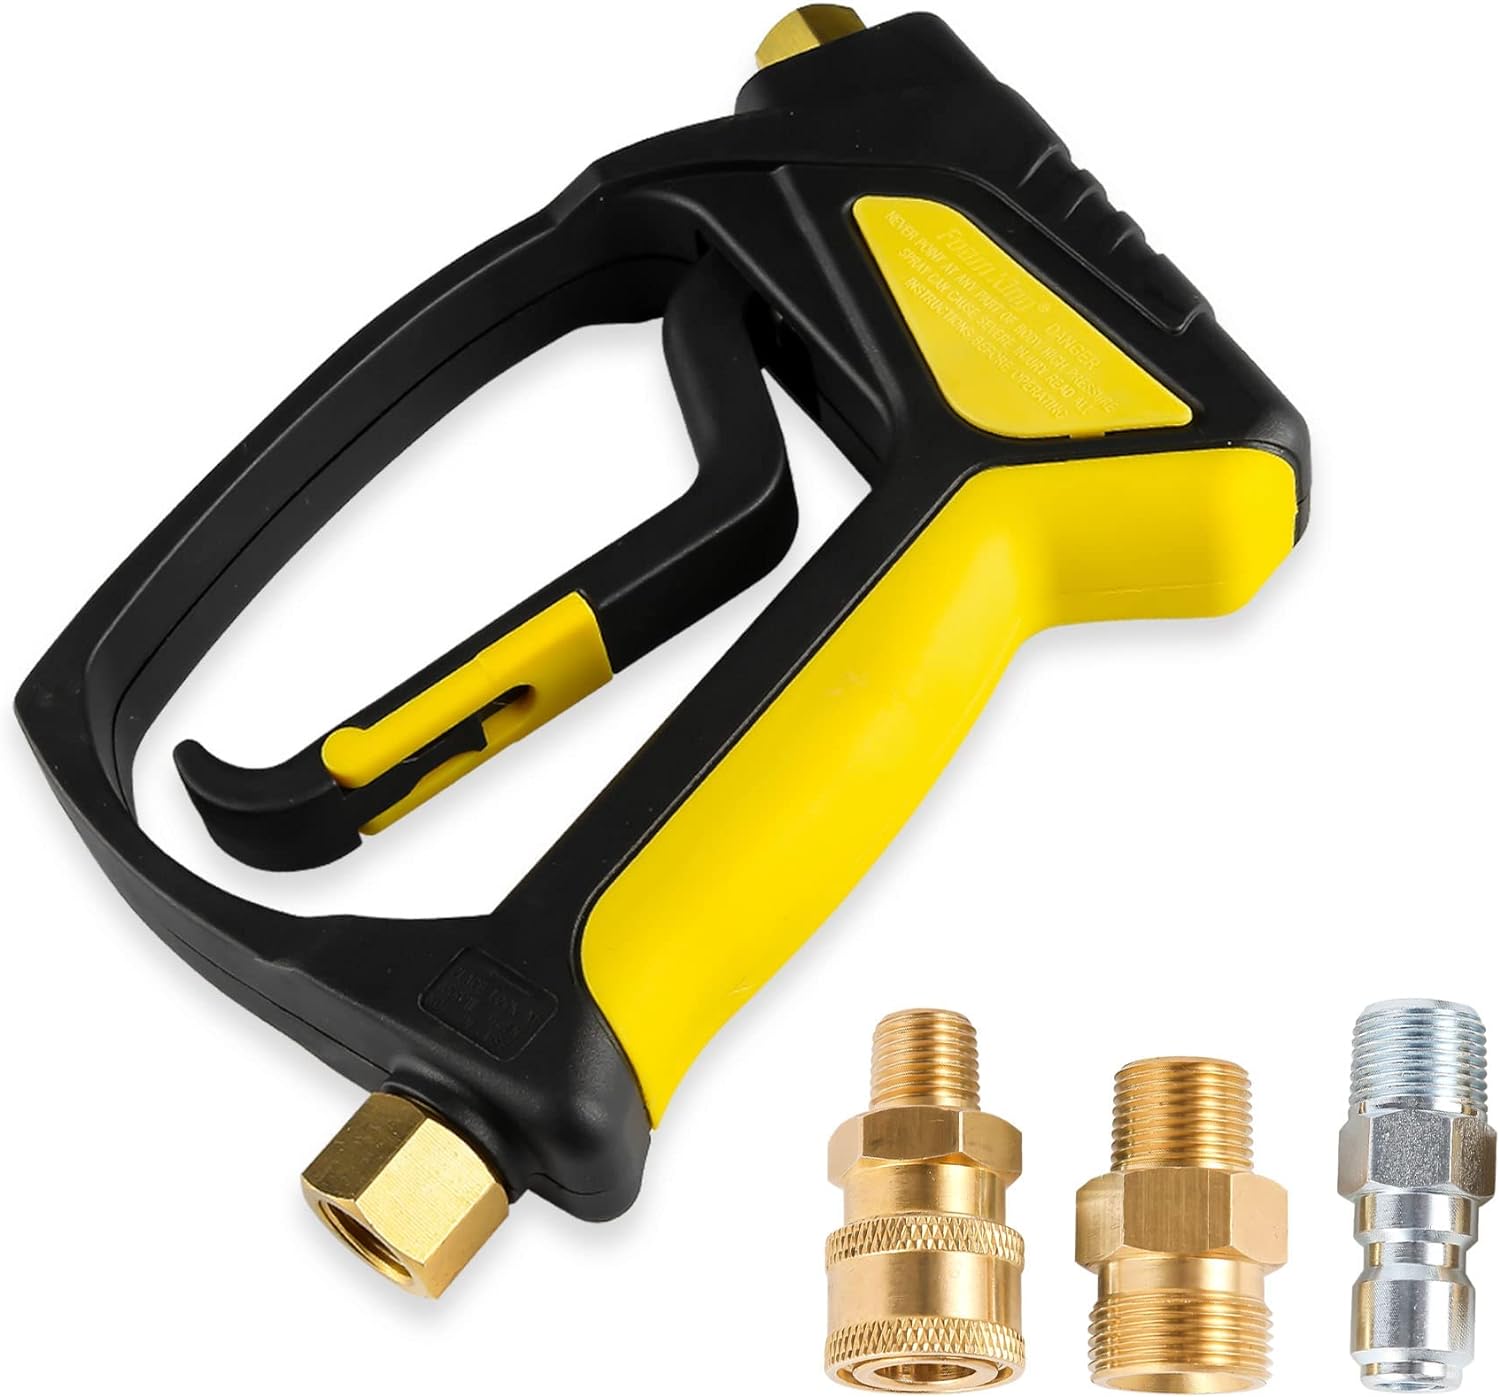 Foam King The Snubster  Short Pressure Washer Gun Handle with Swivel - Foam Cannon Attachment for Pressure Washers - for Car, Truck, Bike, Home, RV, Boat